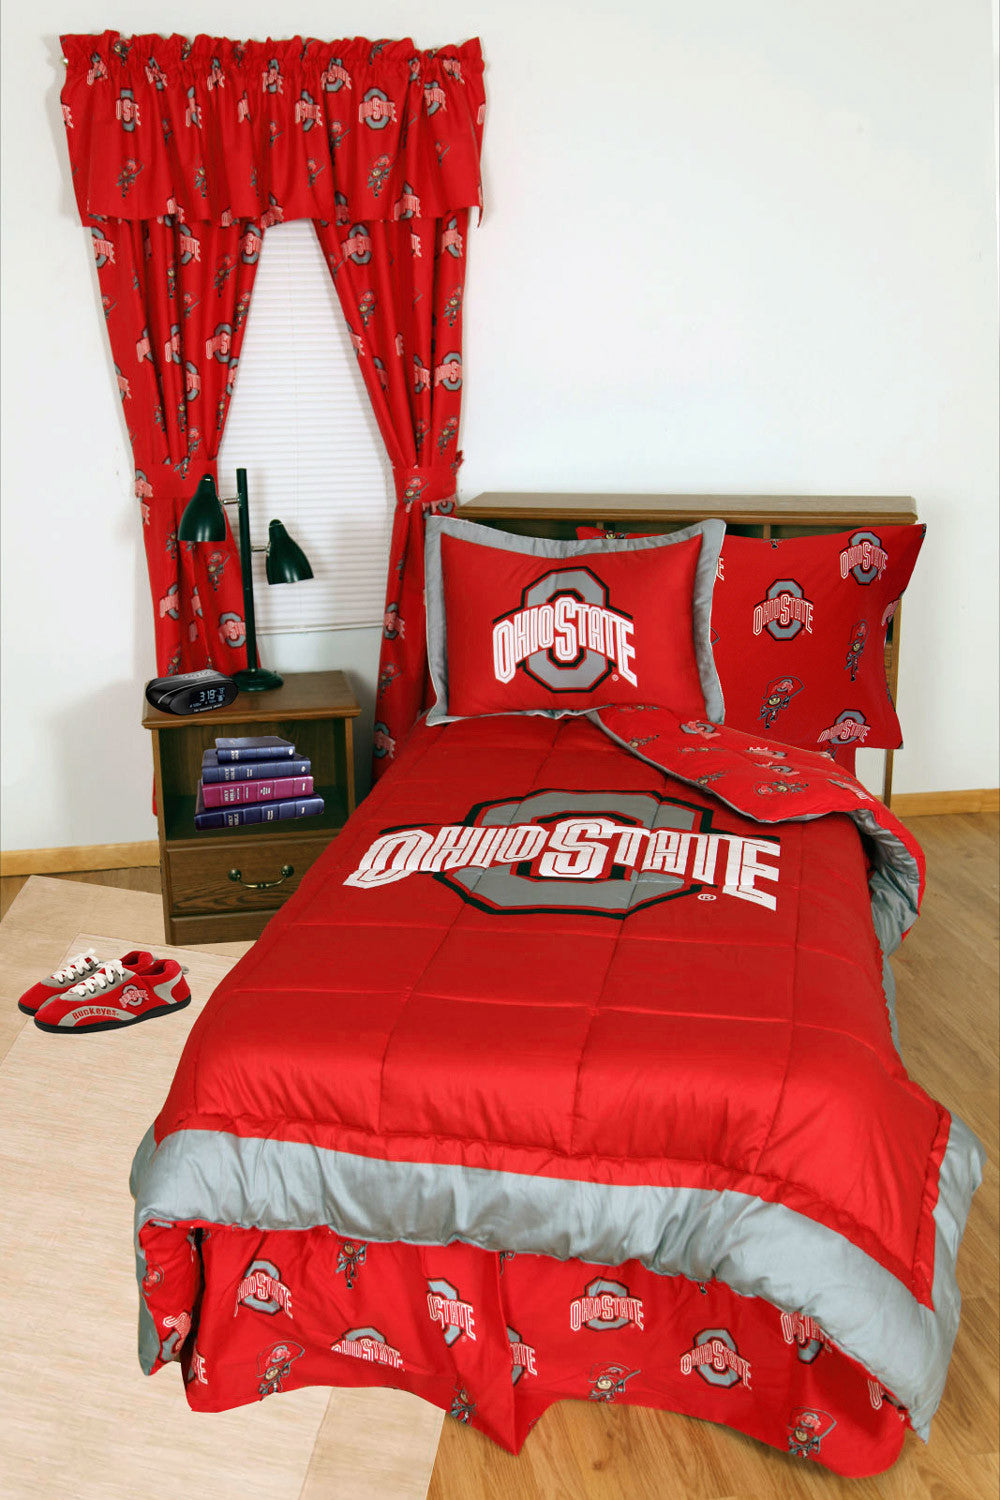 Ohio State Bed In A Bag Twin - With Team Colored Sheets - Ohibbtw By College Covers